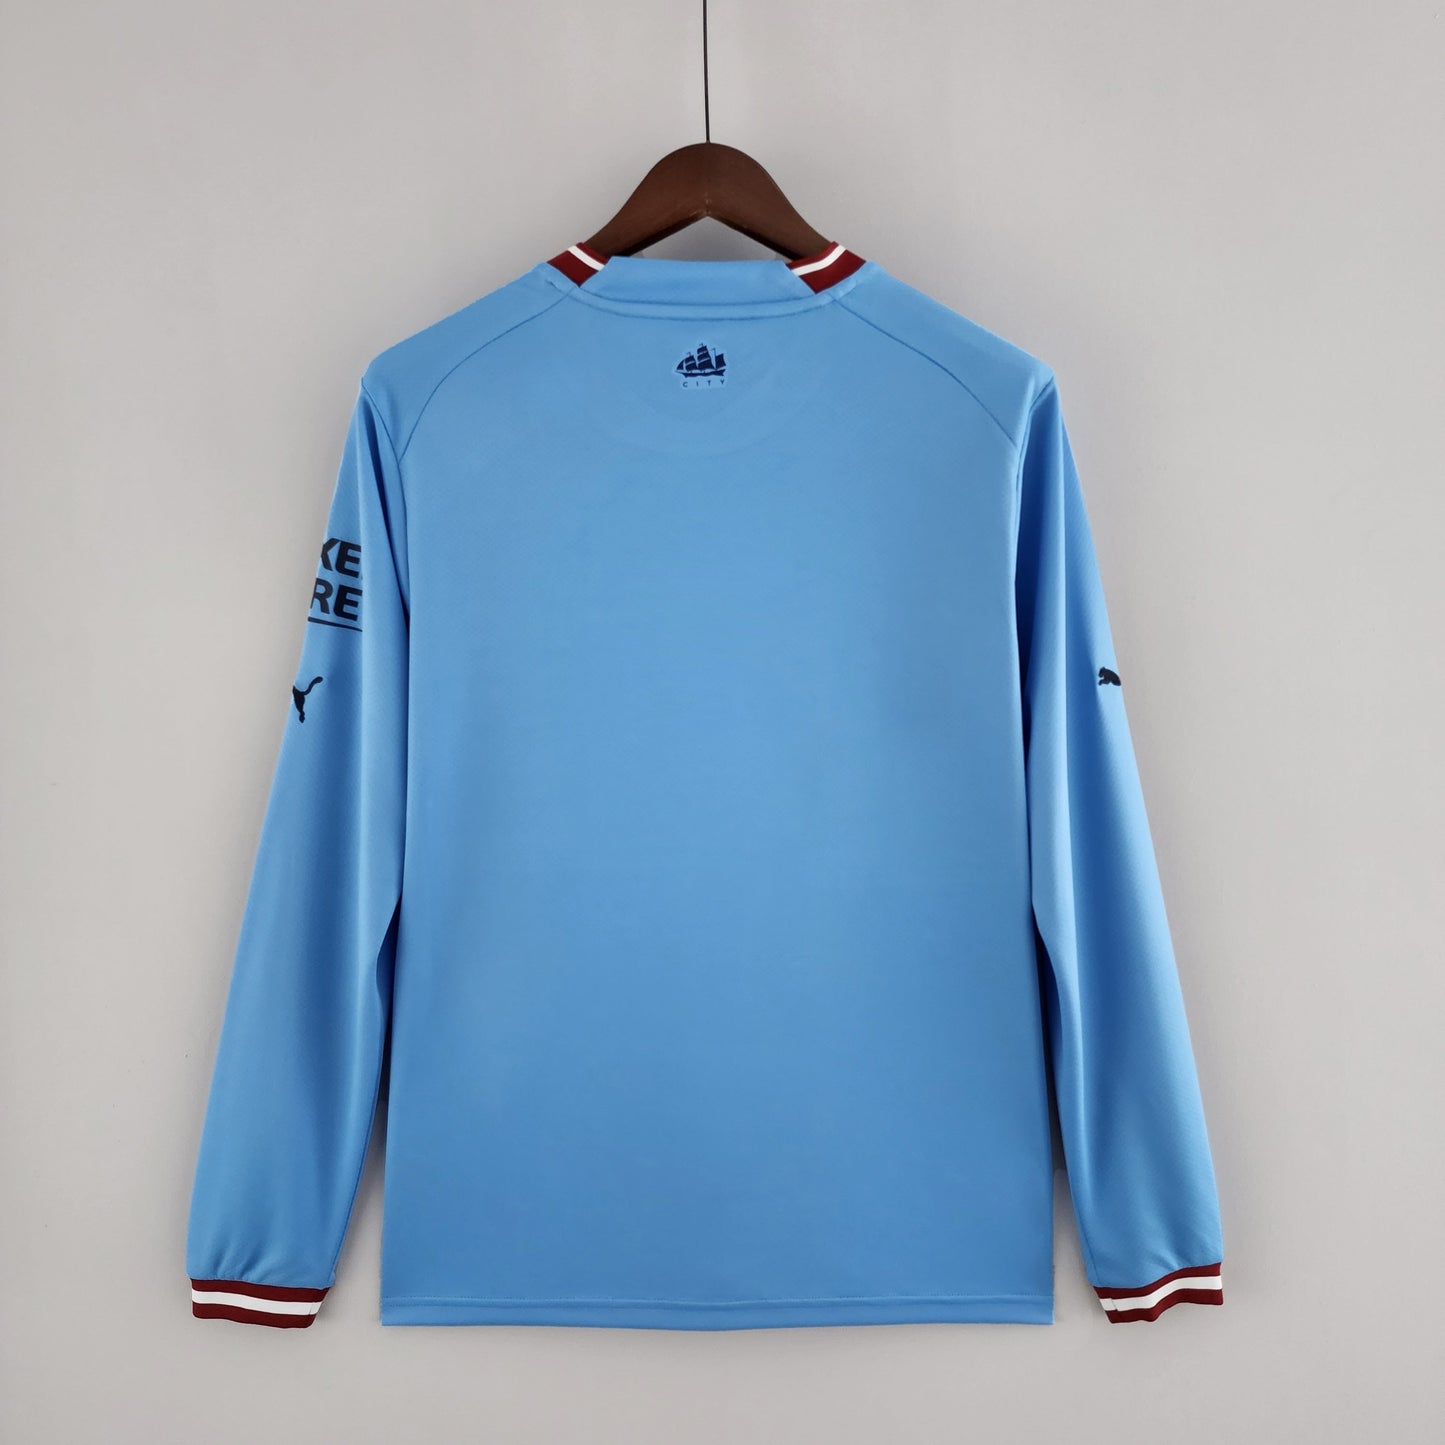 Manchester City Home Kit Long Sleeve 22/23